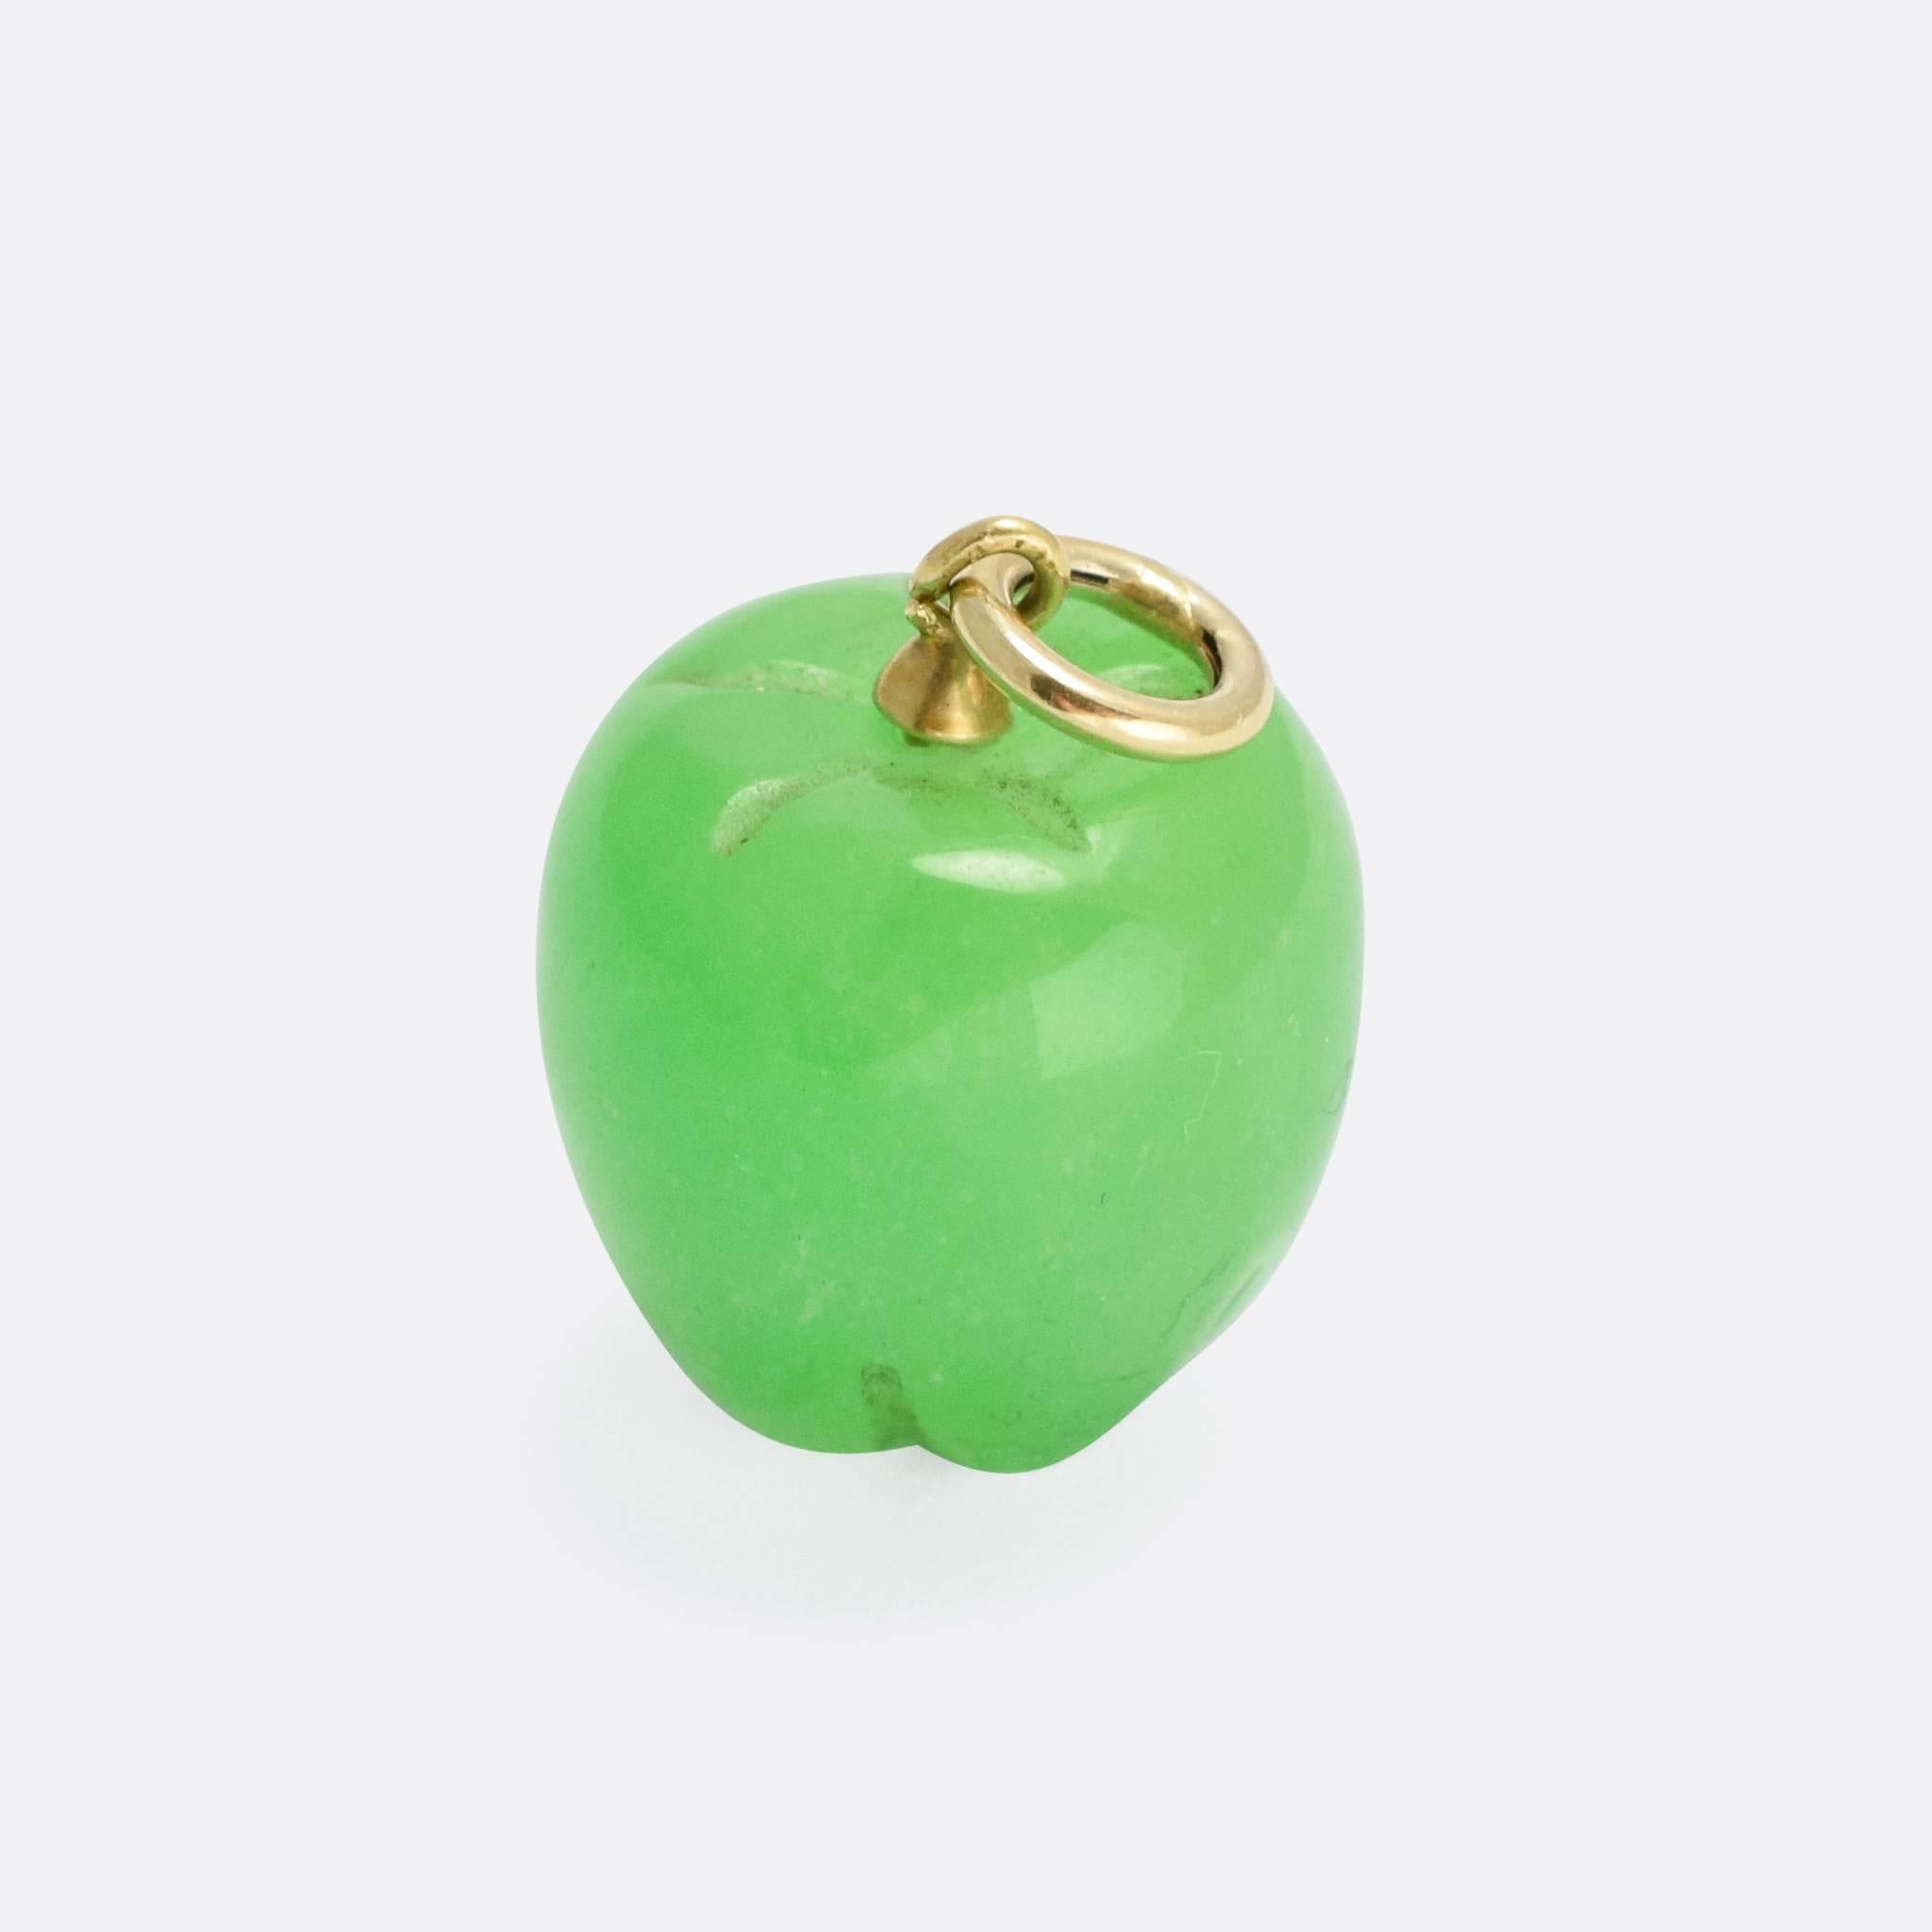 A cool antique Green Apple pendant, the fruit is carved from a single piece of apple-green jade. A simple gold bail has been added for wear as a pendant, or as part of a charm collection. Especially lovely, and quite